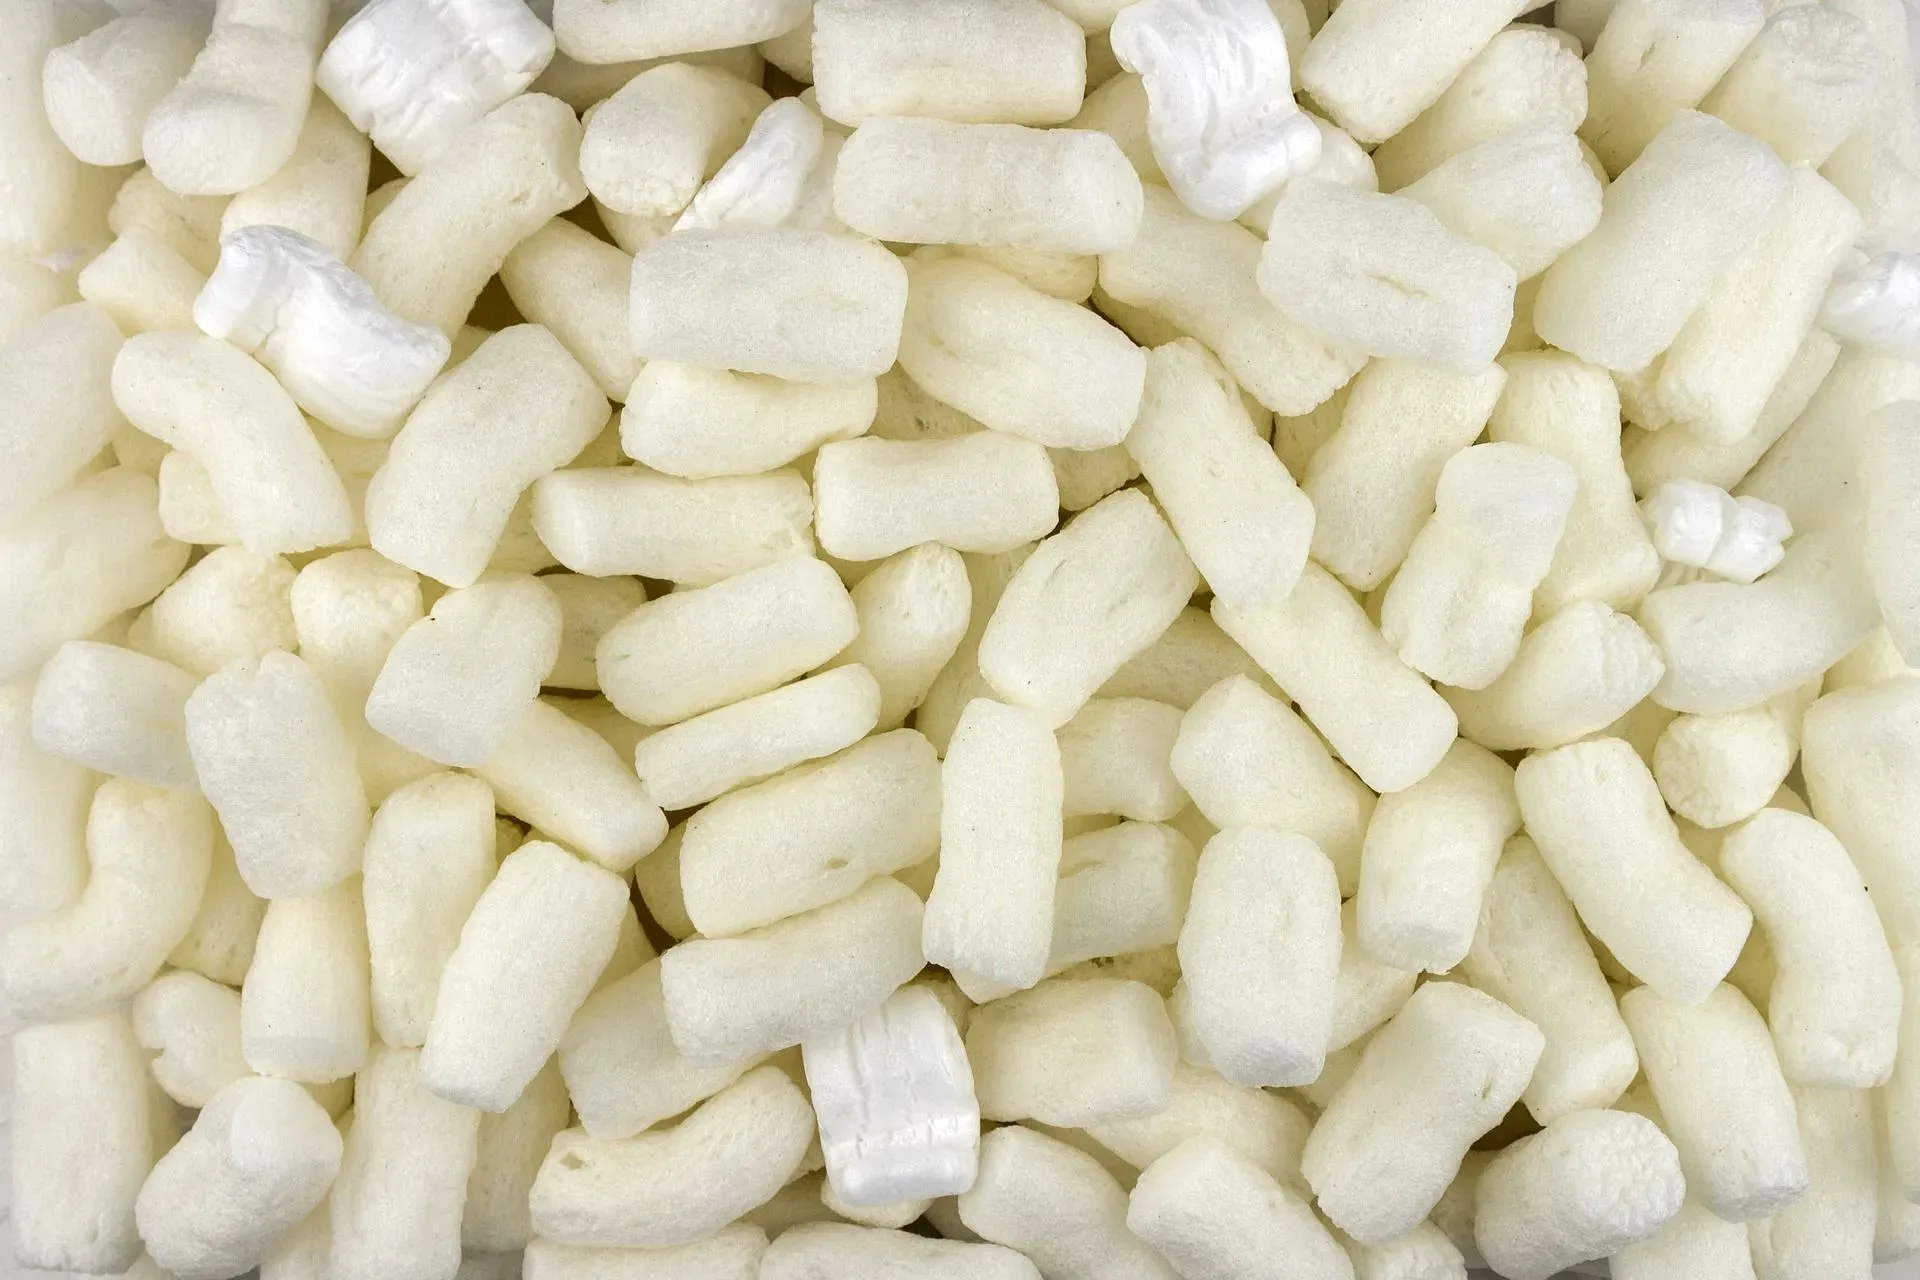 Packing peanuts are safe for use and handy for packing delicate things.